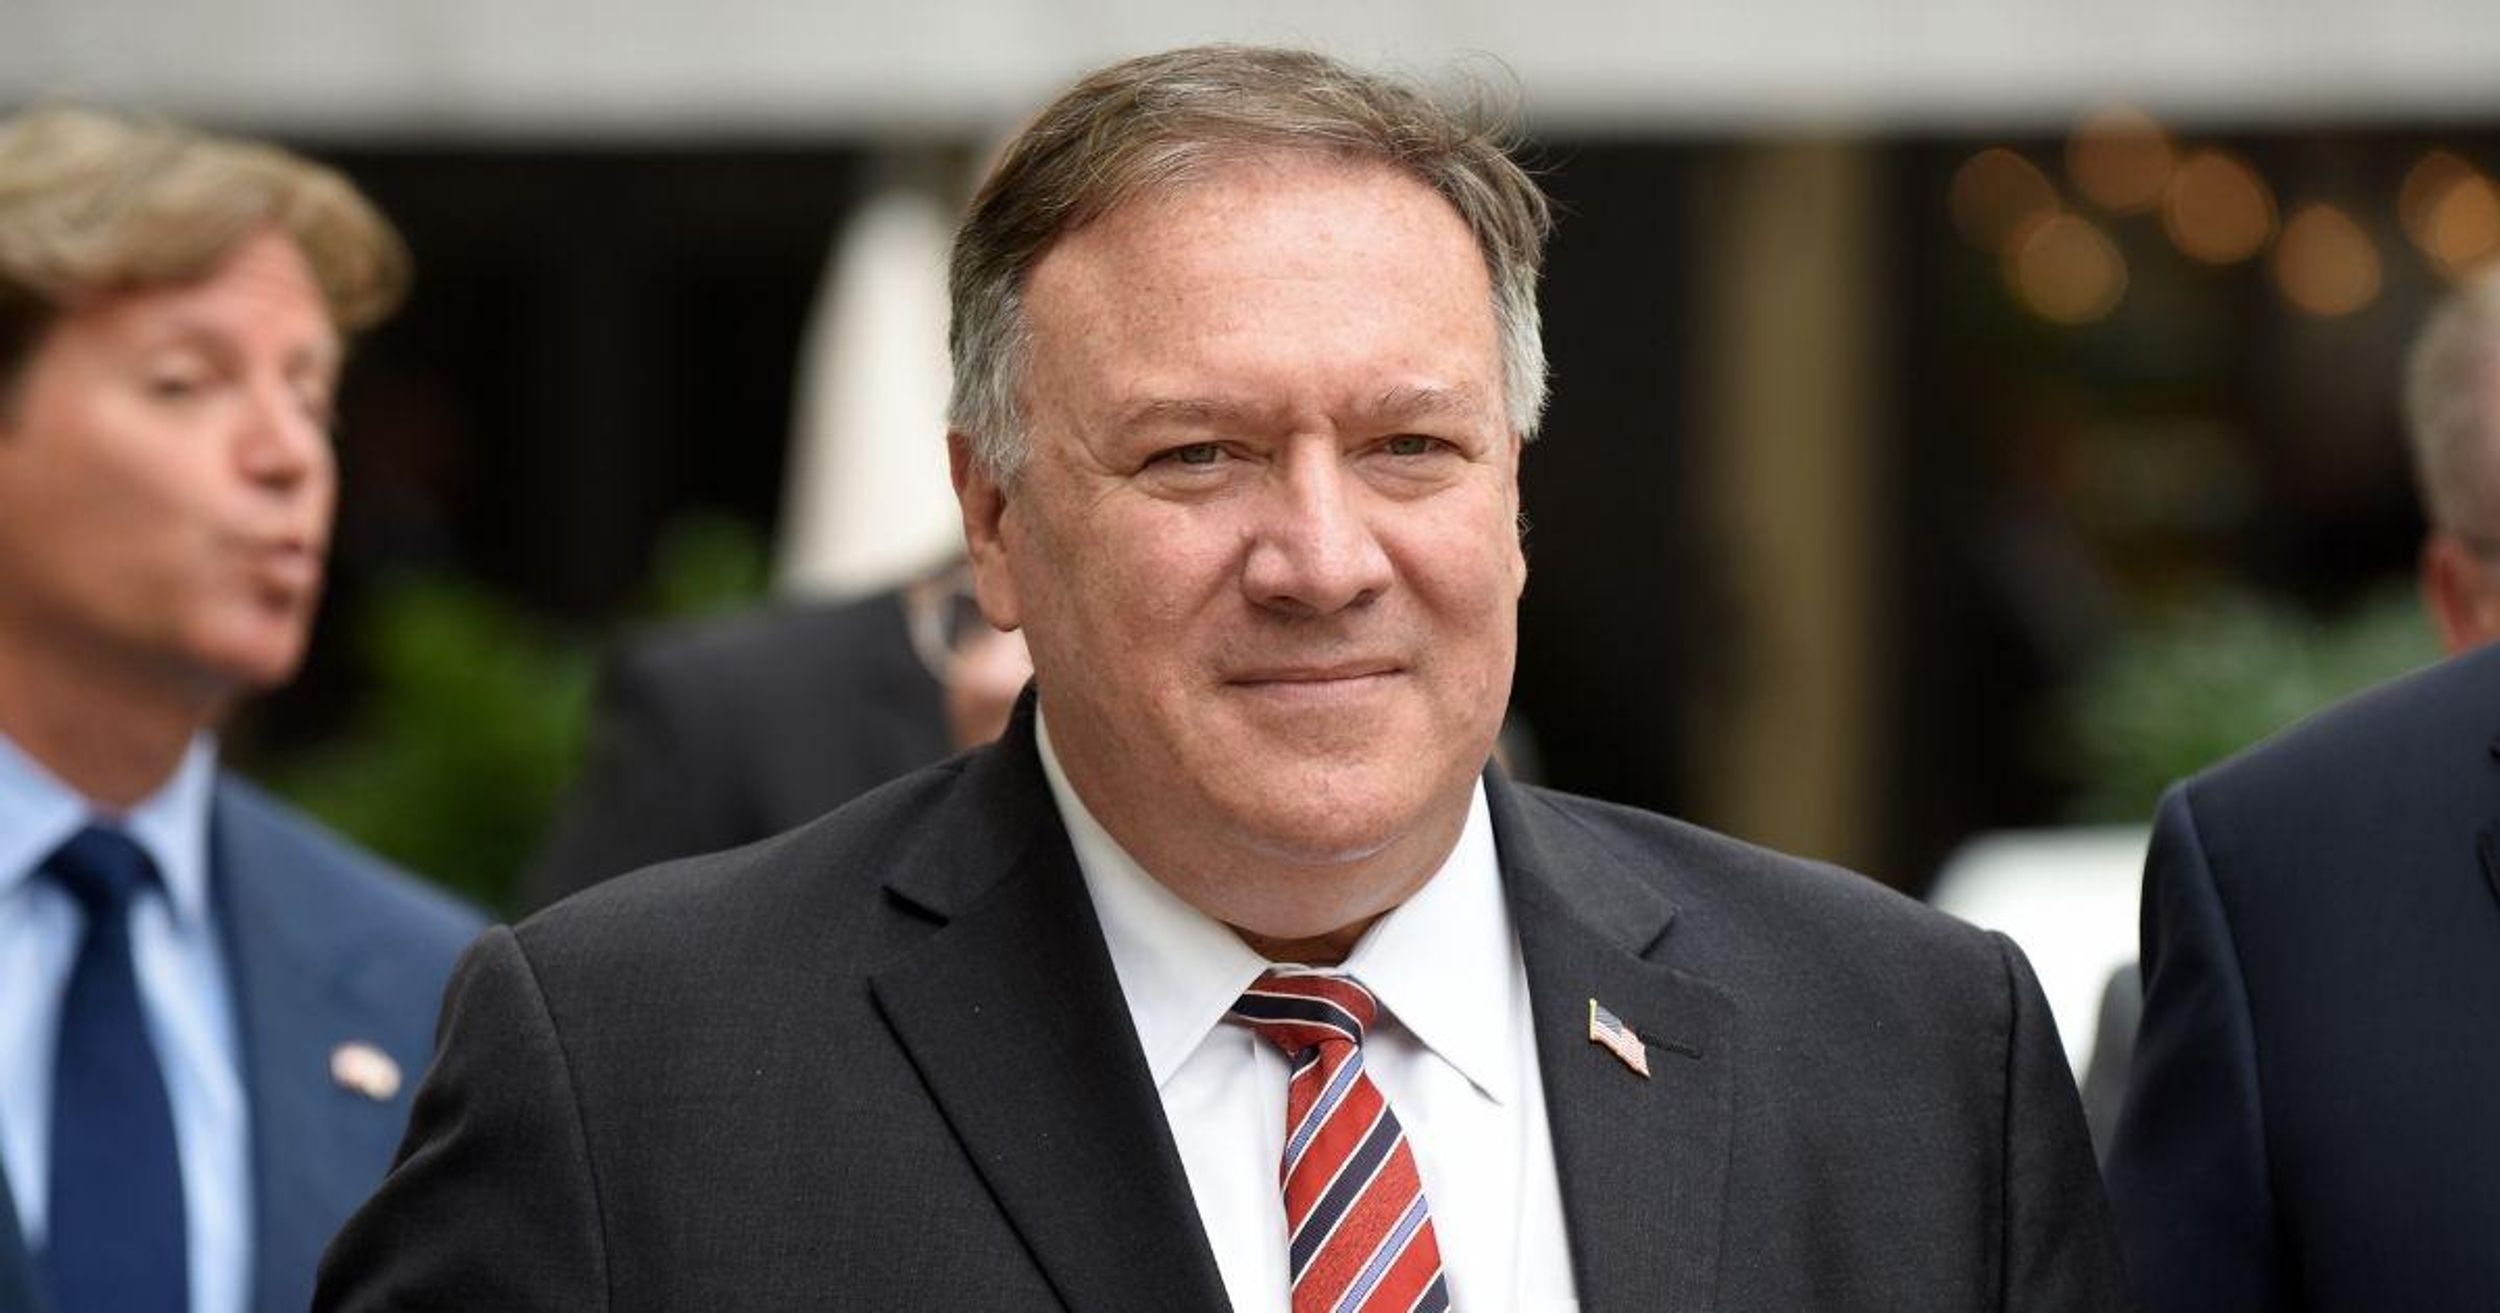 Mike Pompeo Blasted After Trying To Absurdly Claim That Multiculturalism Is 'Not Who America Is'